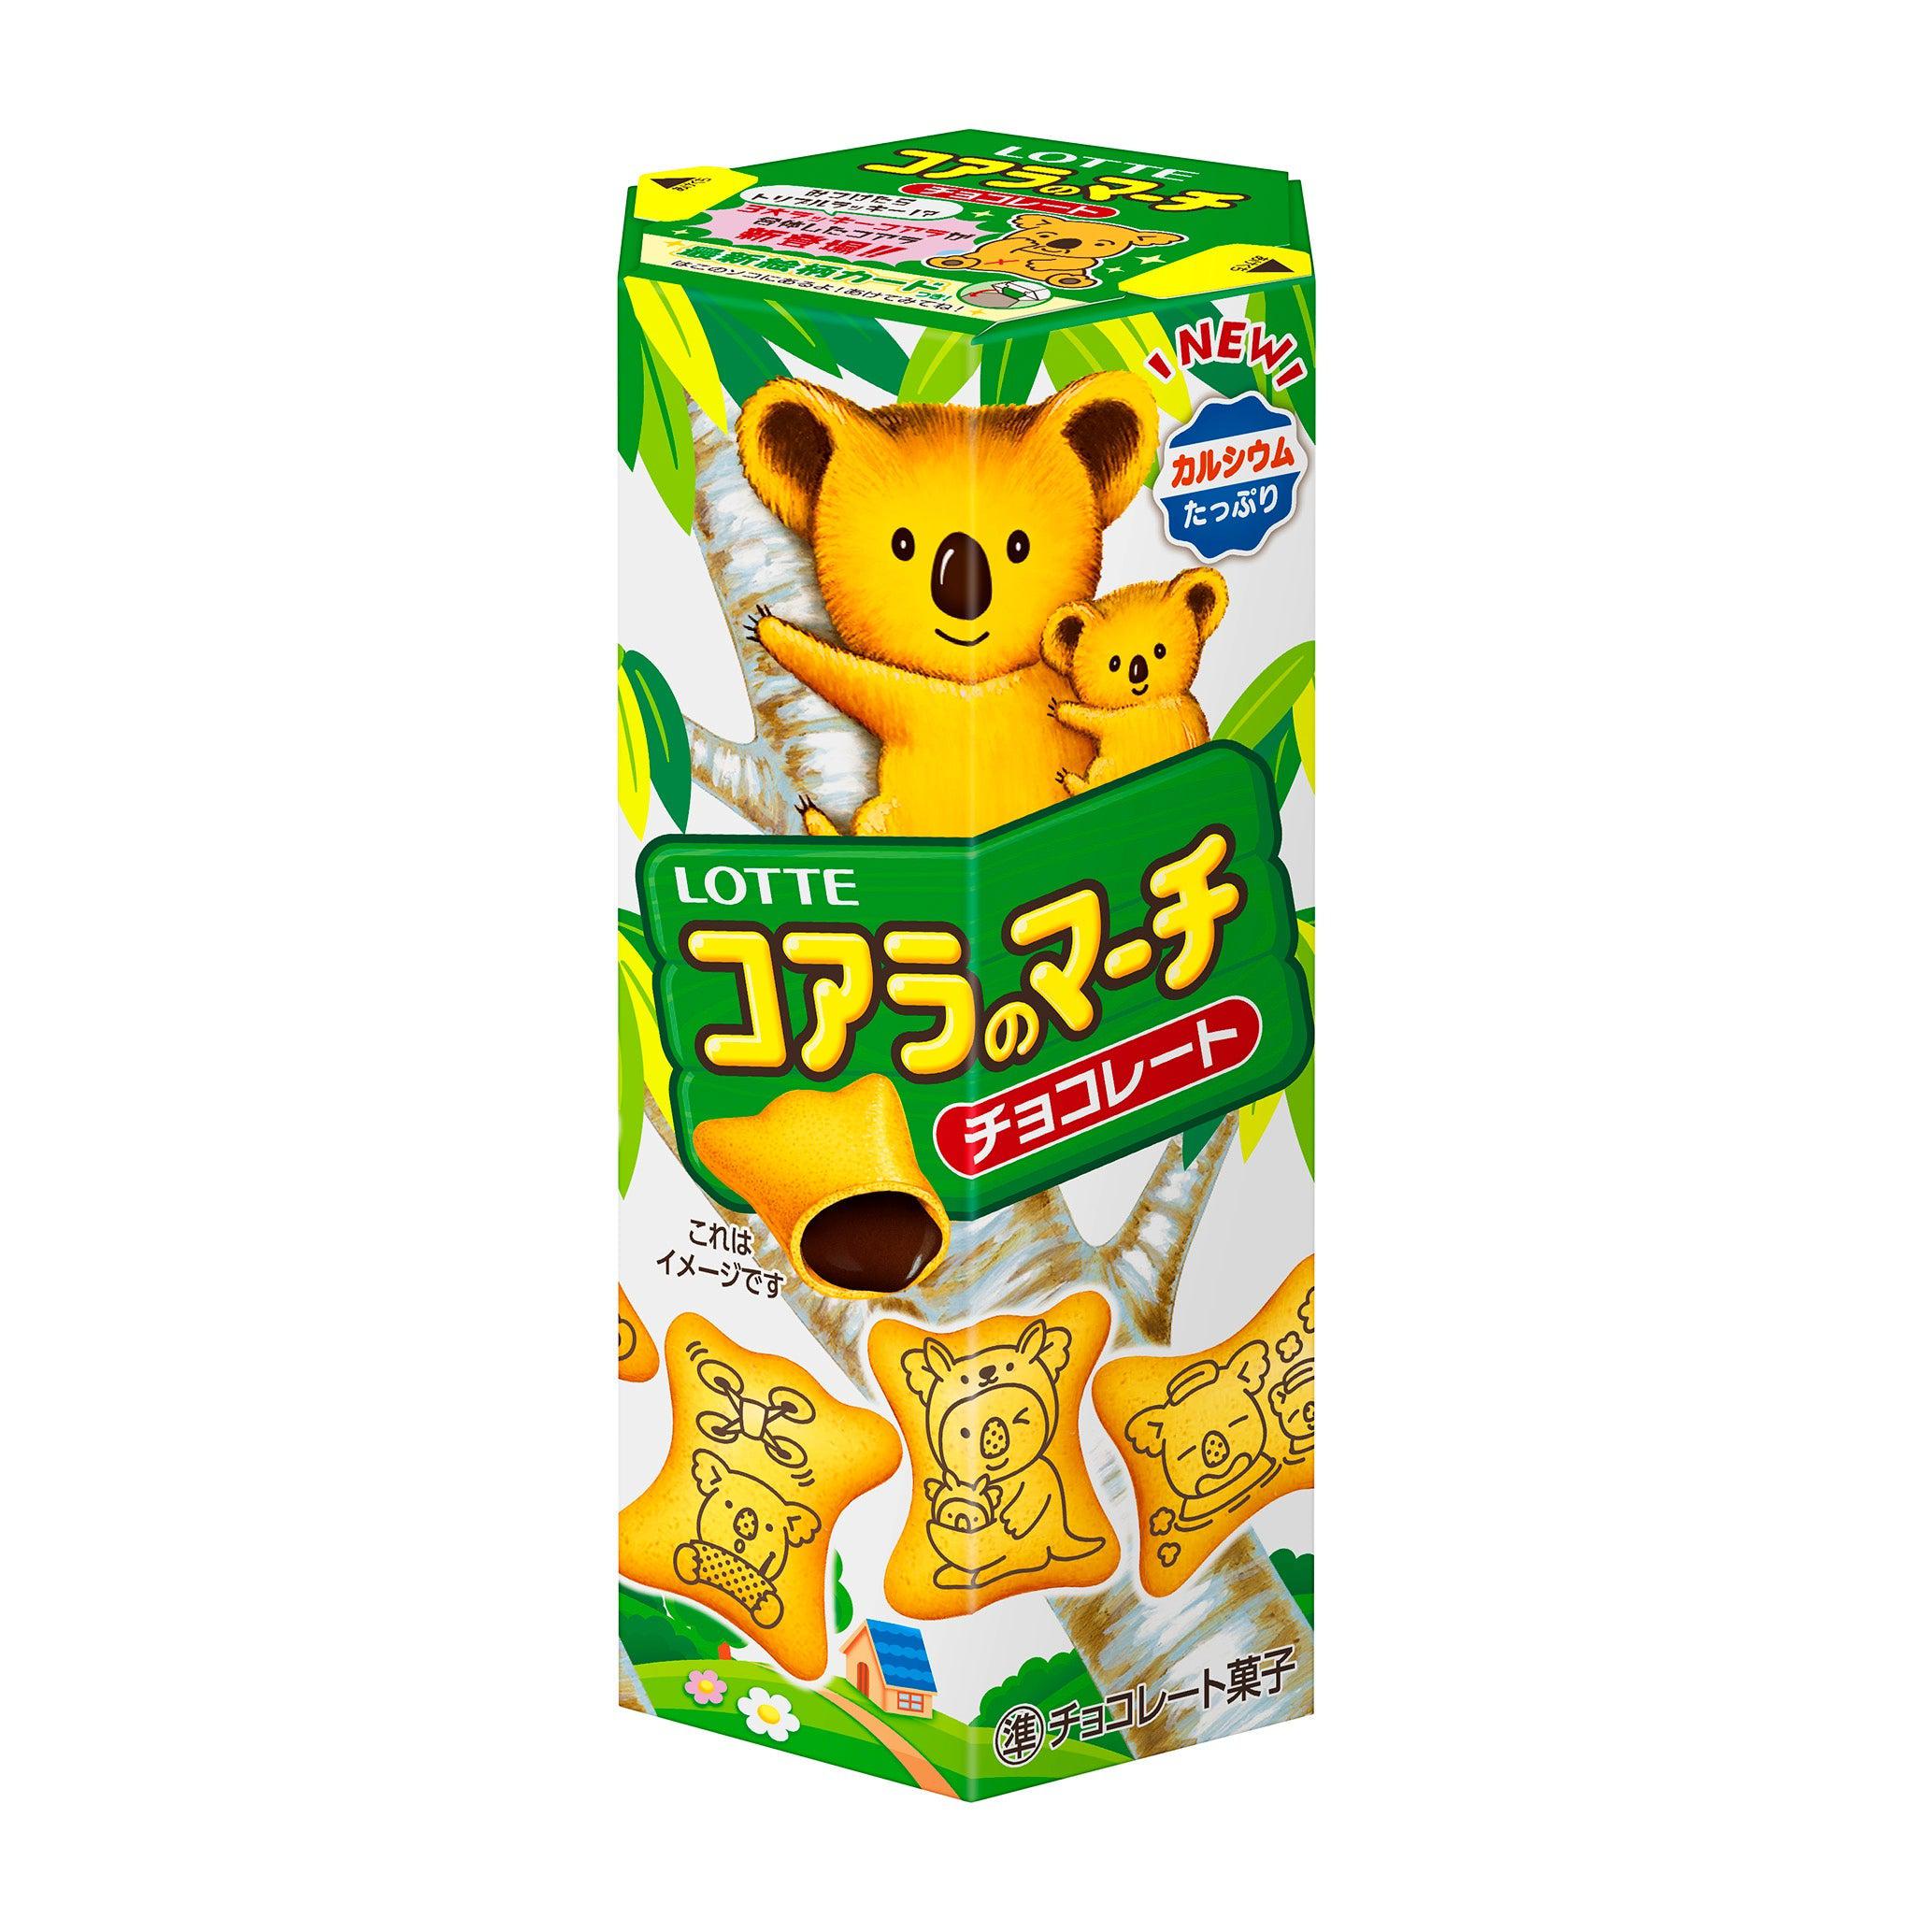 Lotte Koala's March Bite Sized Cookies with Chocolate Filling 48g, Japanese Taste